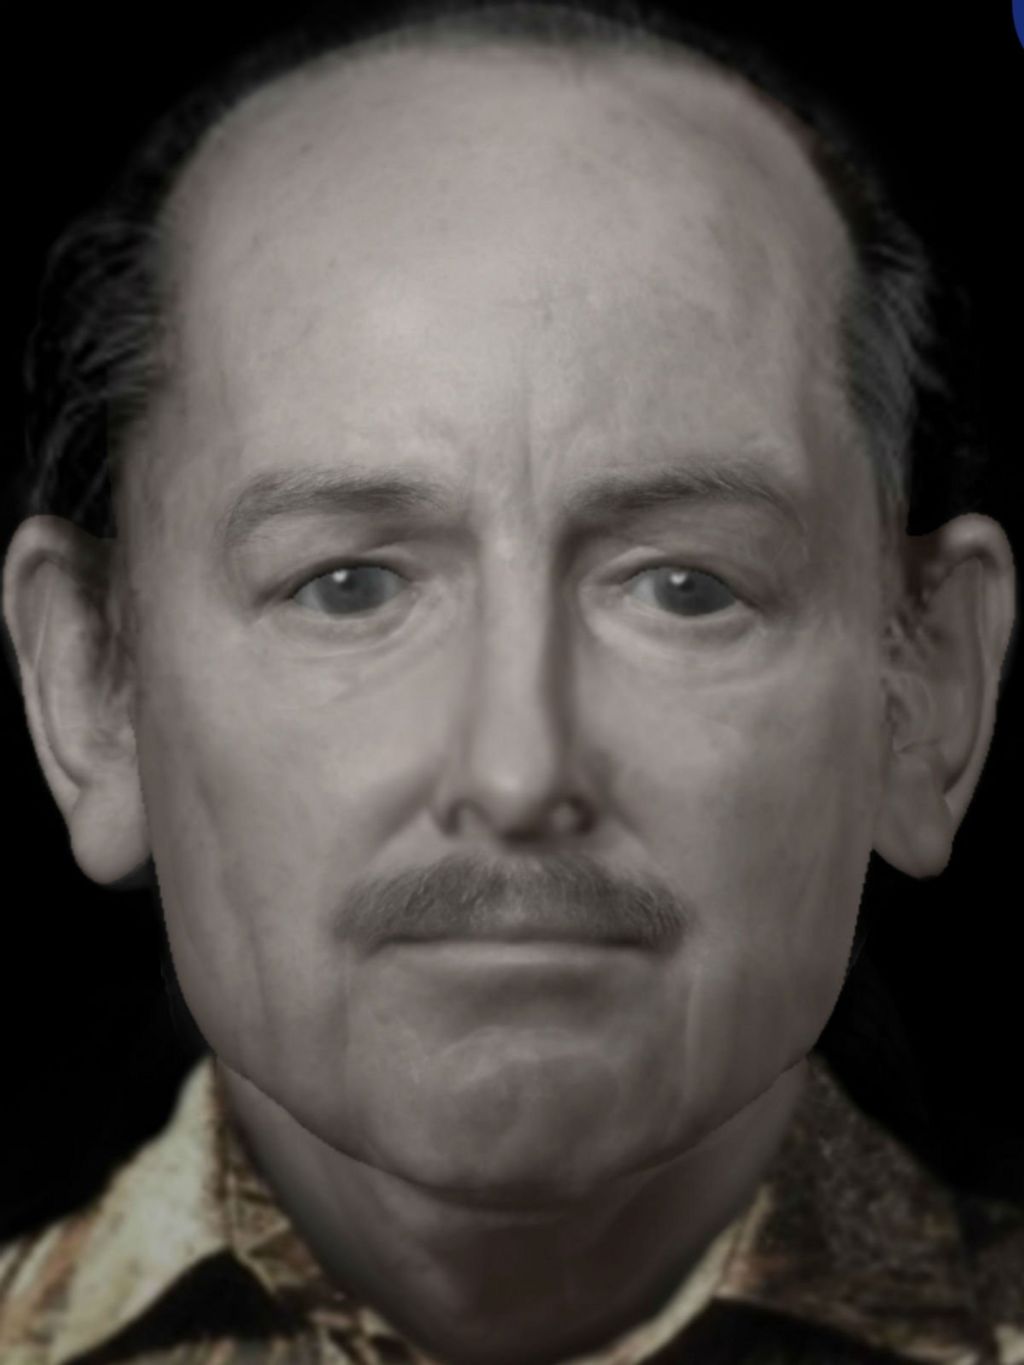 An artist's interpretation of the man who was killed in 1991